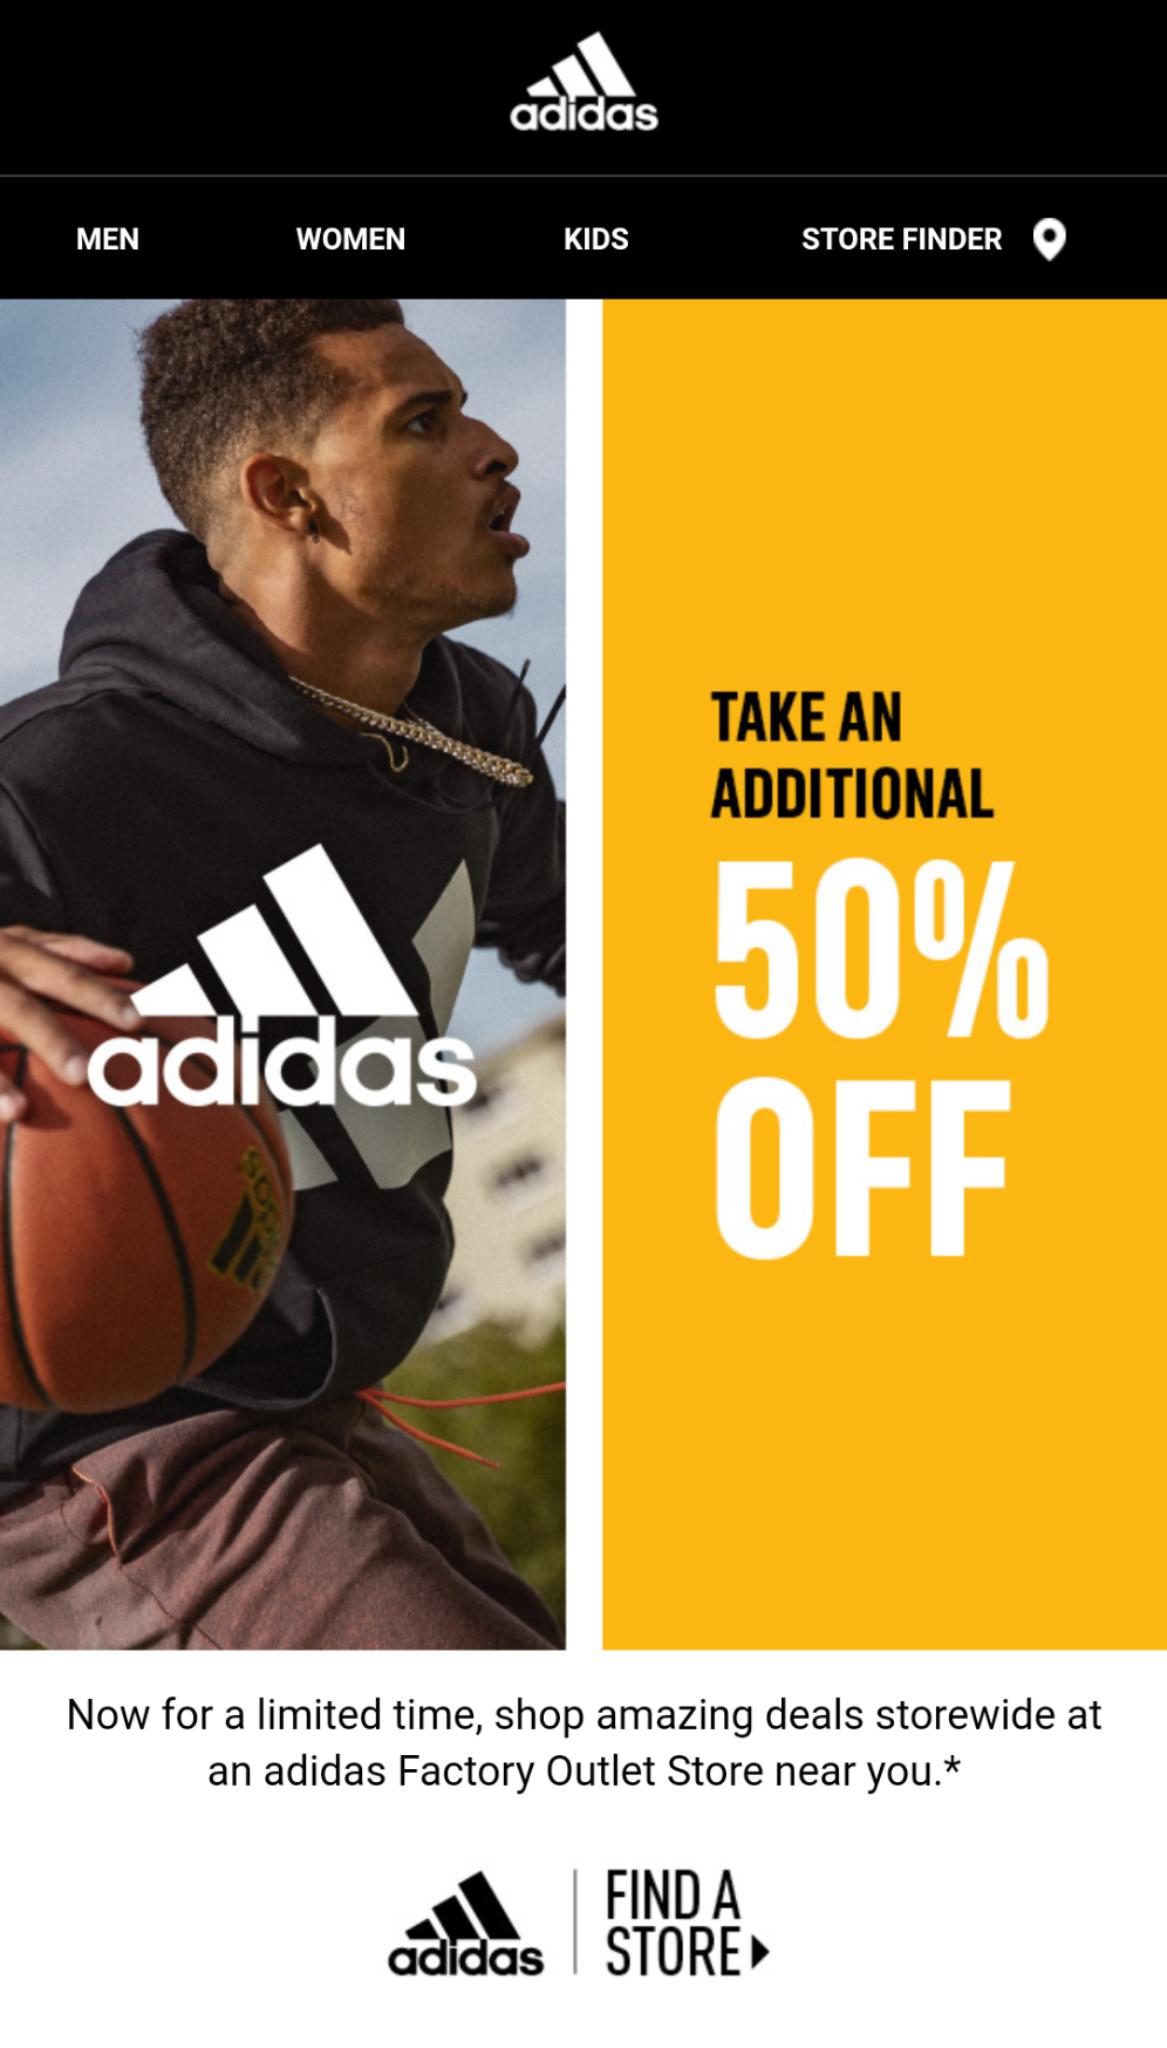 adidas] Outlet (in store only) 50% store (plus possible 15% for giving email) - RedFlagDeals.com Forums